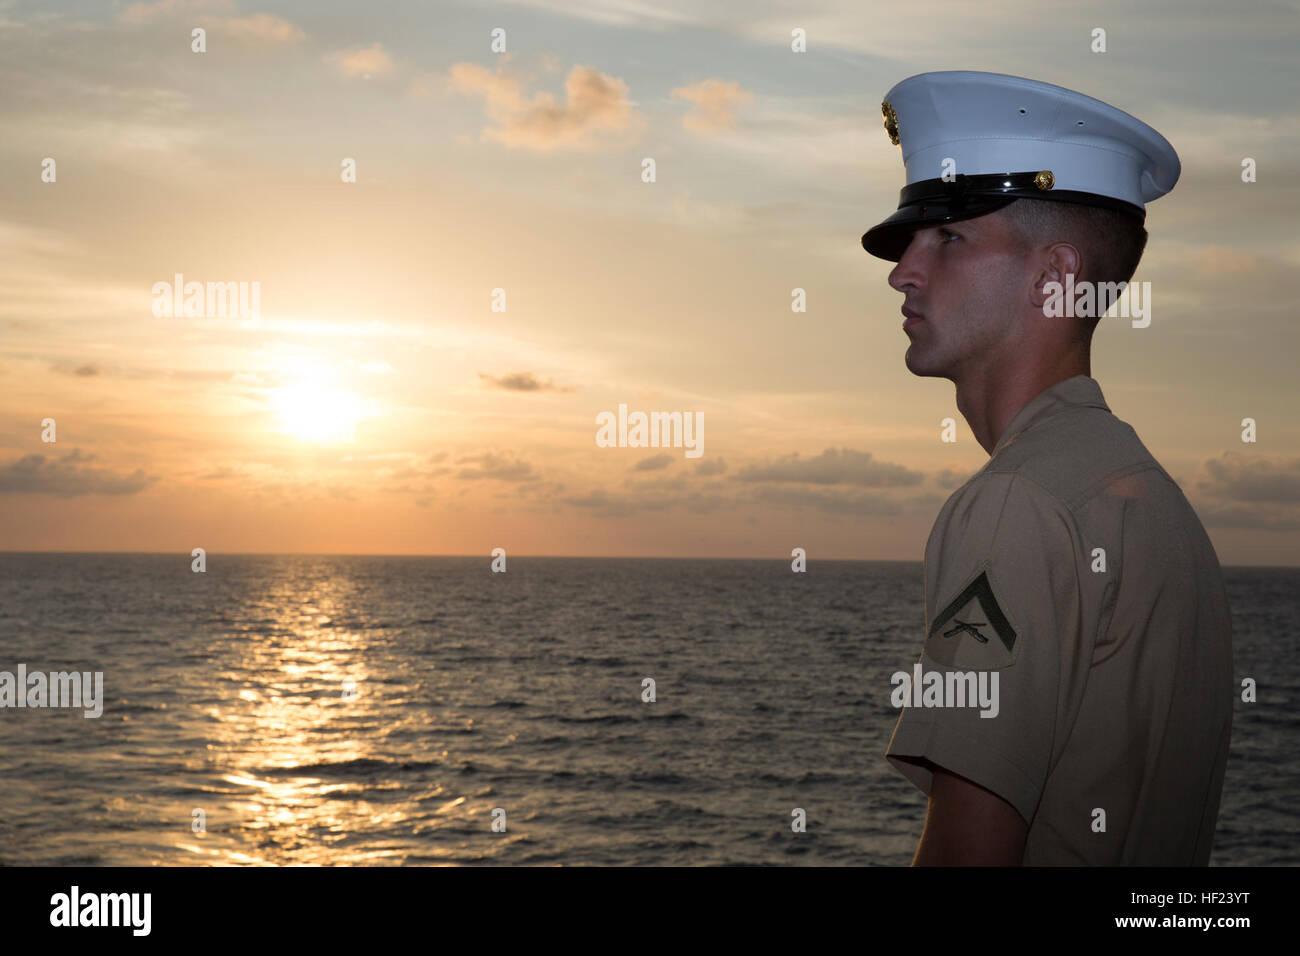 Lance Cpl. Ethan C. Hogeland, native of Fayetteville, N.C., and amphibious assault vehicle crewman with 2nd Assault Amphibian Battalion, 2nd Marine Division, Marine Corps Base Camp Lejeune, N.C., watches the sunrise on the flight deck in preparation for manning the rails as the USS New York (LPD 21) sails into South Florida for Fleet Week Port Everglades 2014, April 28. Approximately 120 Marines from 2nd AAV Bn., 2nd Battalion, 6th Marine Regiment, 2nd Marine Division, Marine Corps Base Camp Lejeune, N.C., and Marine Light Attack Helicopter Squadron (HMLA) 269, Marine Corps Air Station New Riv Stock Photo